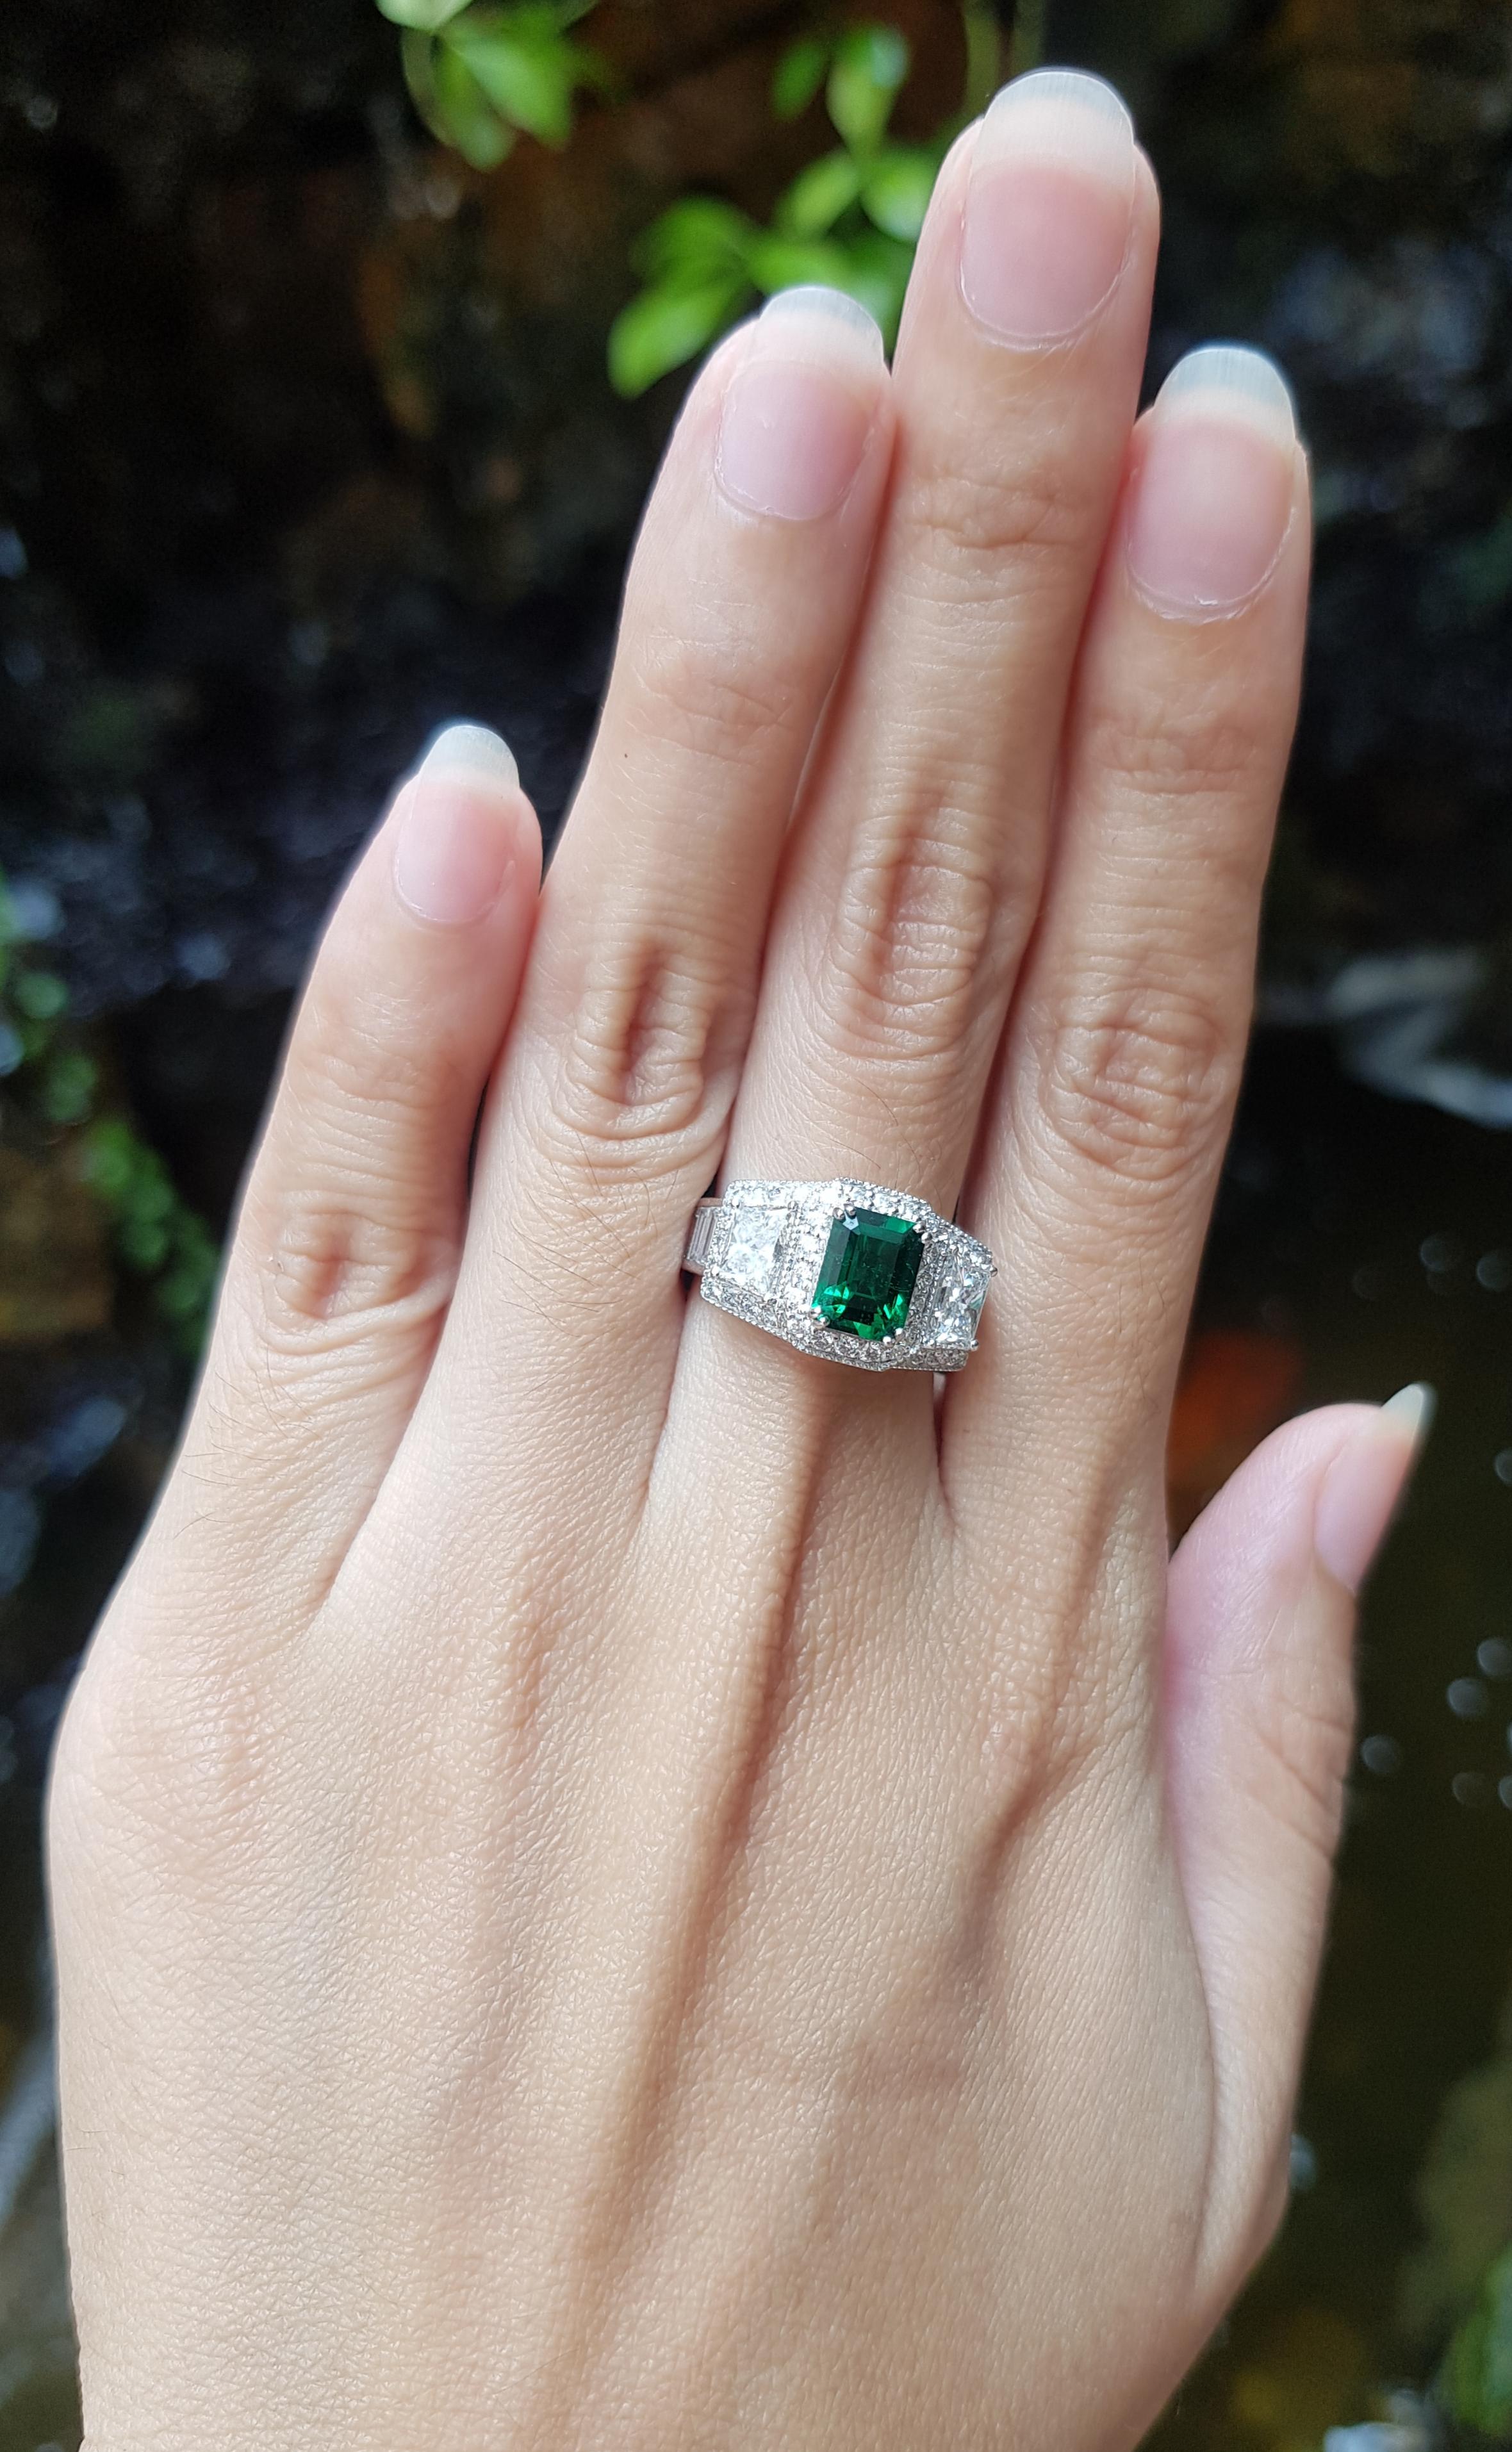 Emerald 1.12 carats with Diamond 2.27 carats Ring set in Platinum 950 Settings

Width:  1.8 cm 
Length: 1.0 cm
Ring Size: 52
Total Weight: 10.06 grams

Emerald
Width:  0.6 cm 
Length: 0.8 cm


